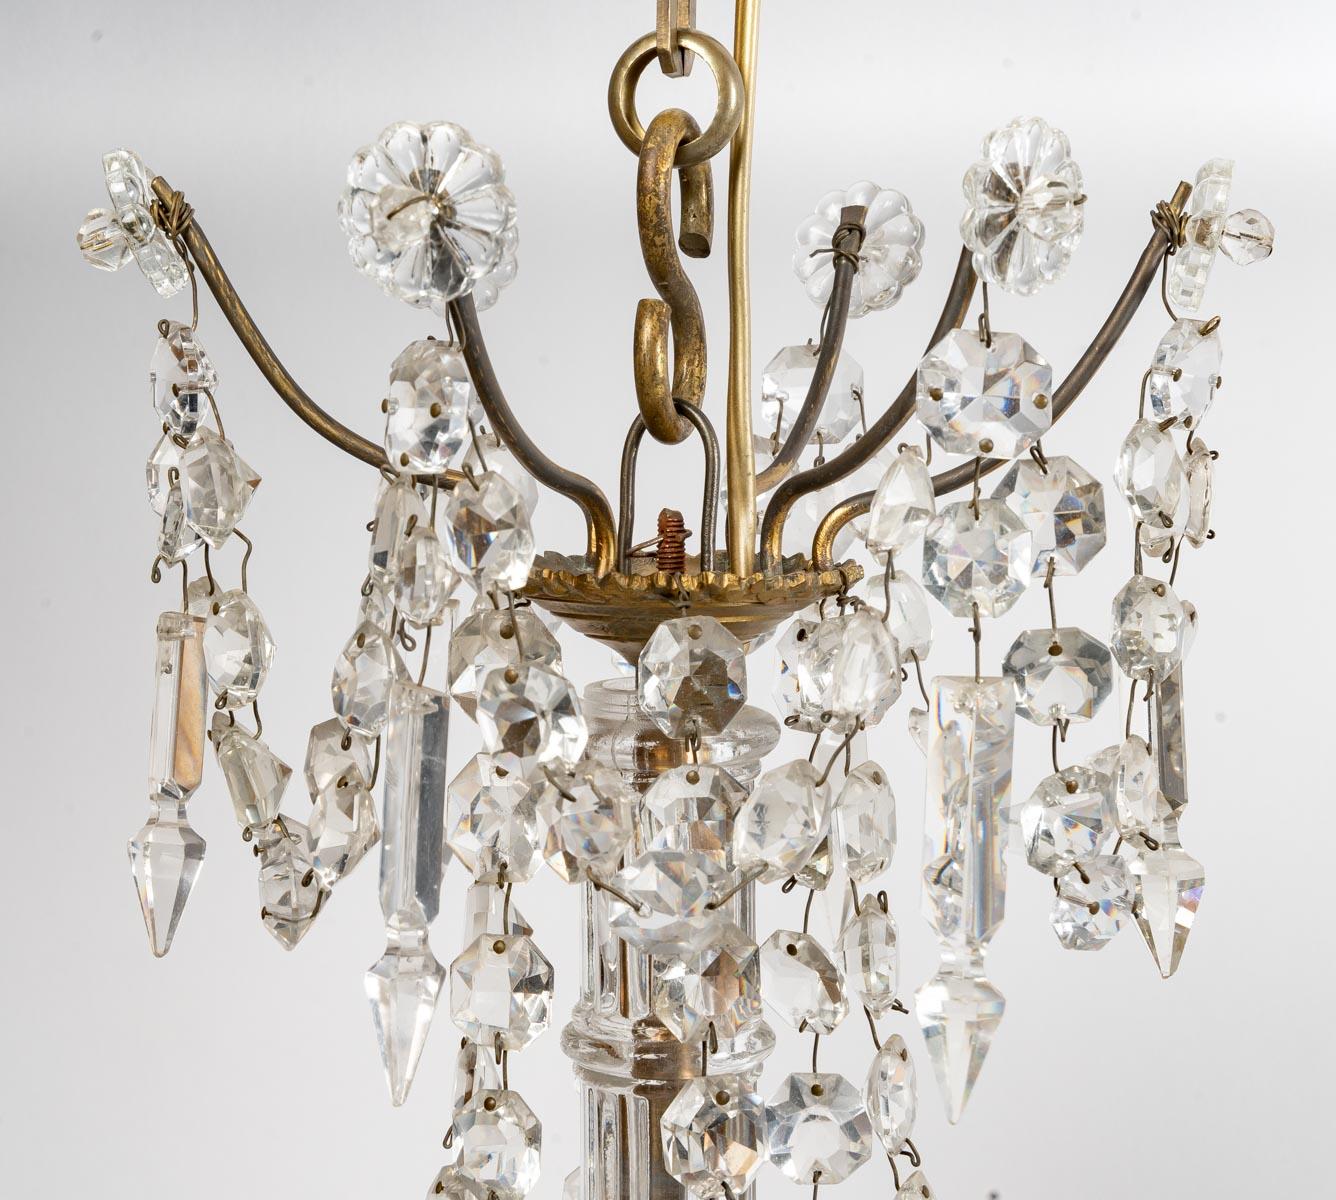 French Baccarat crystal chandelier, 19th century